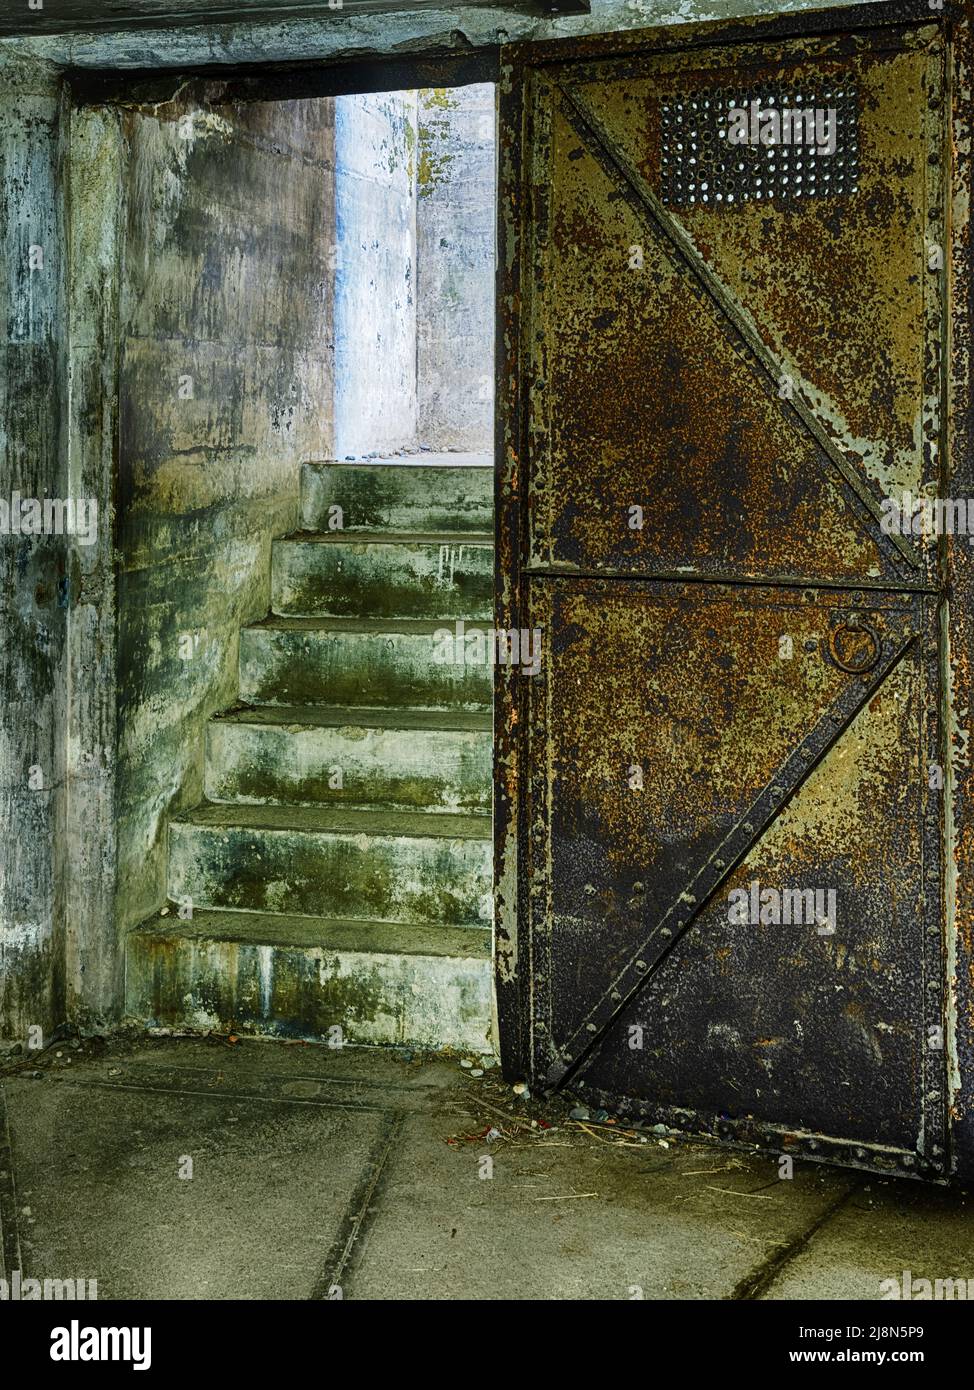 Stairs exiting the basement rooms at Fort Casey appear to be covered in a light layer of green mold. Stock Photo